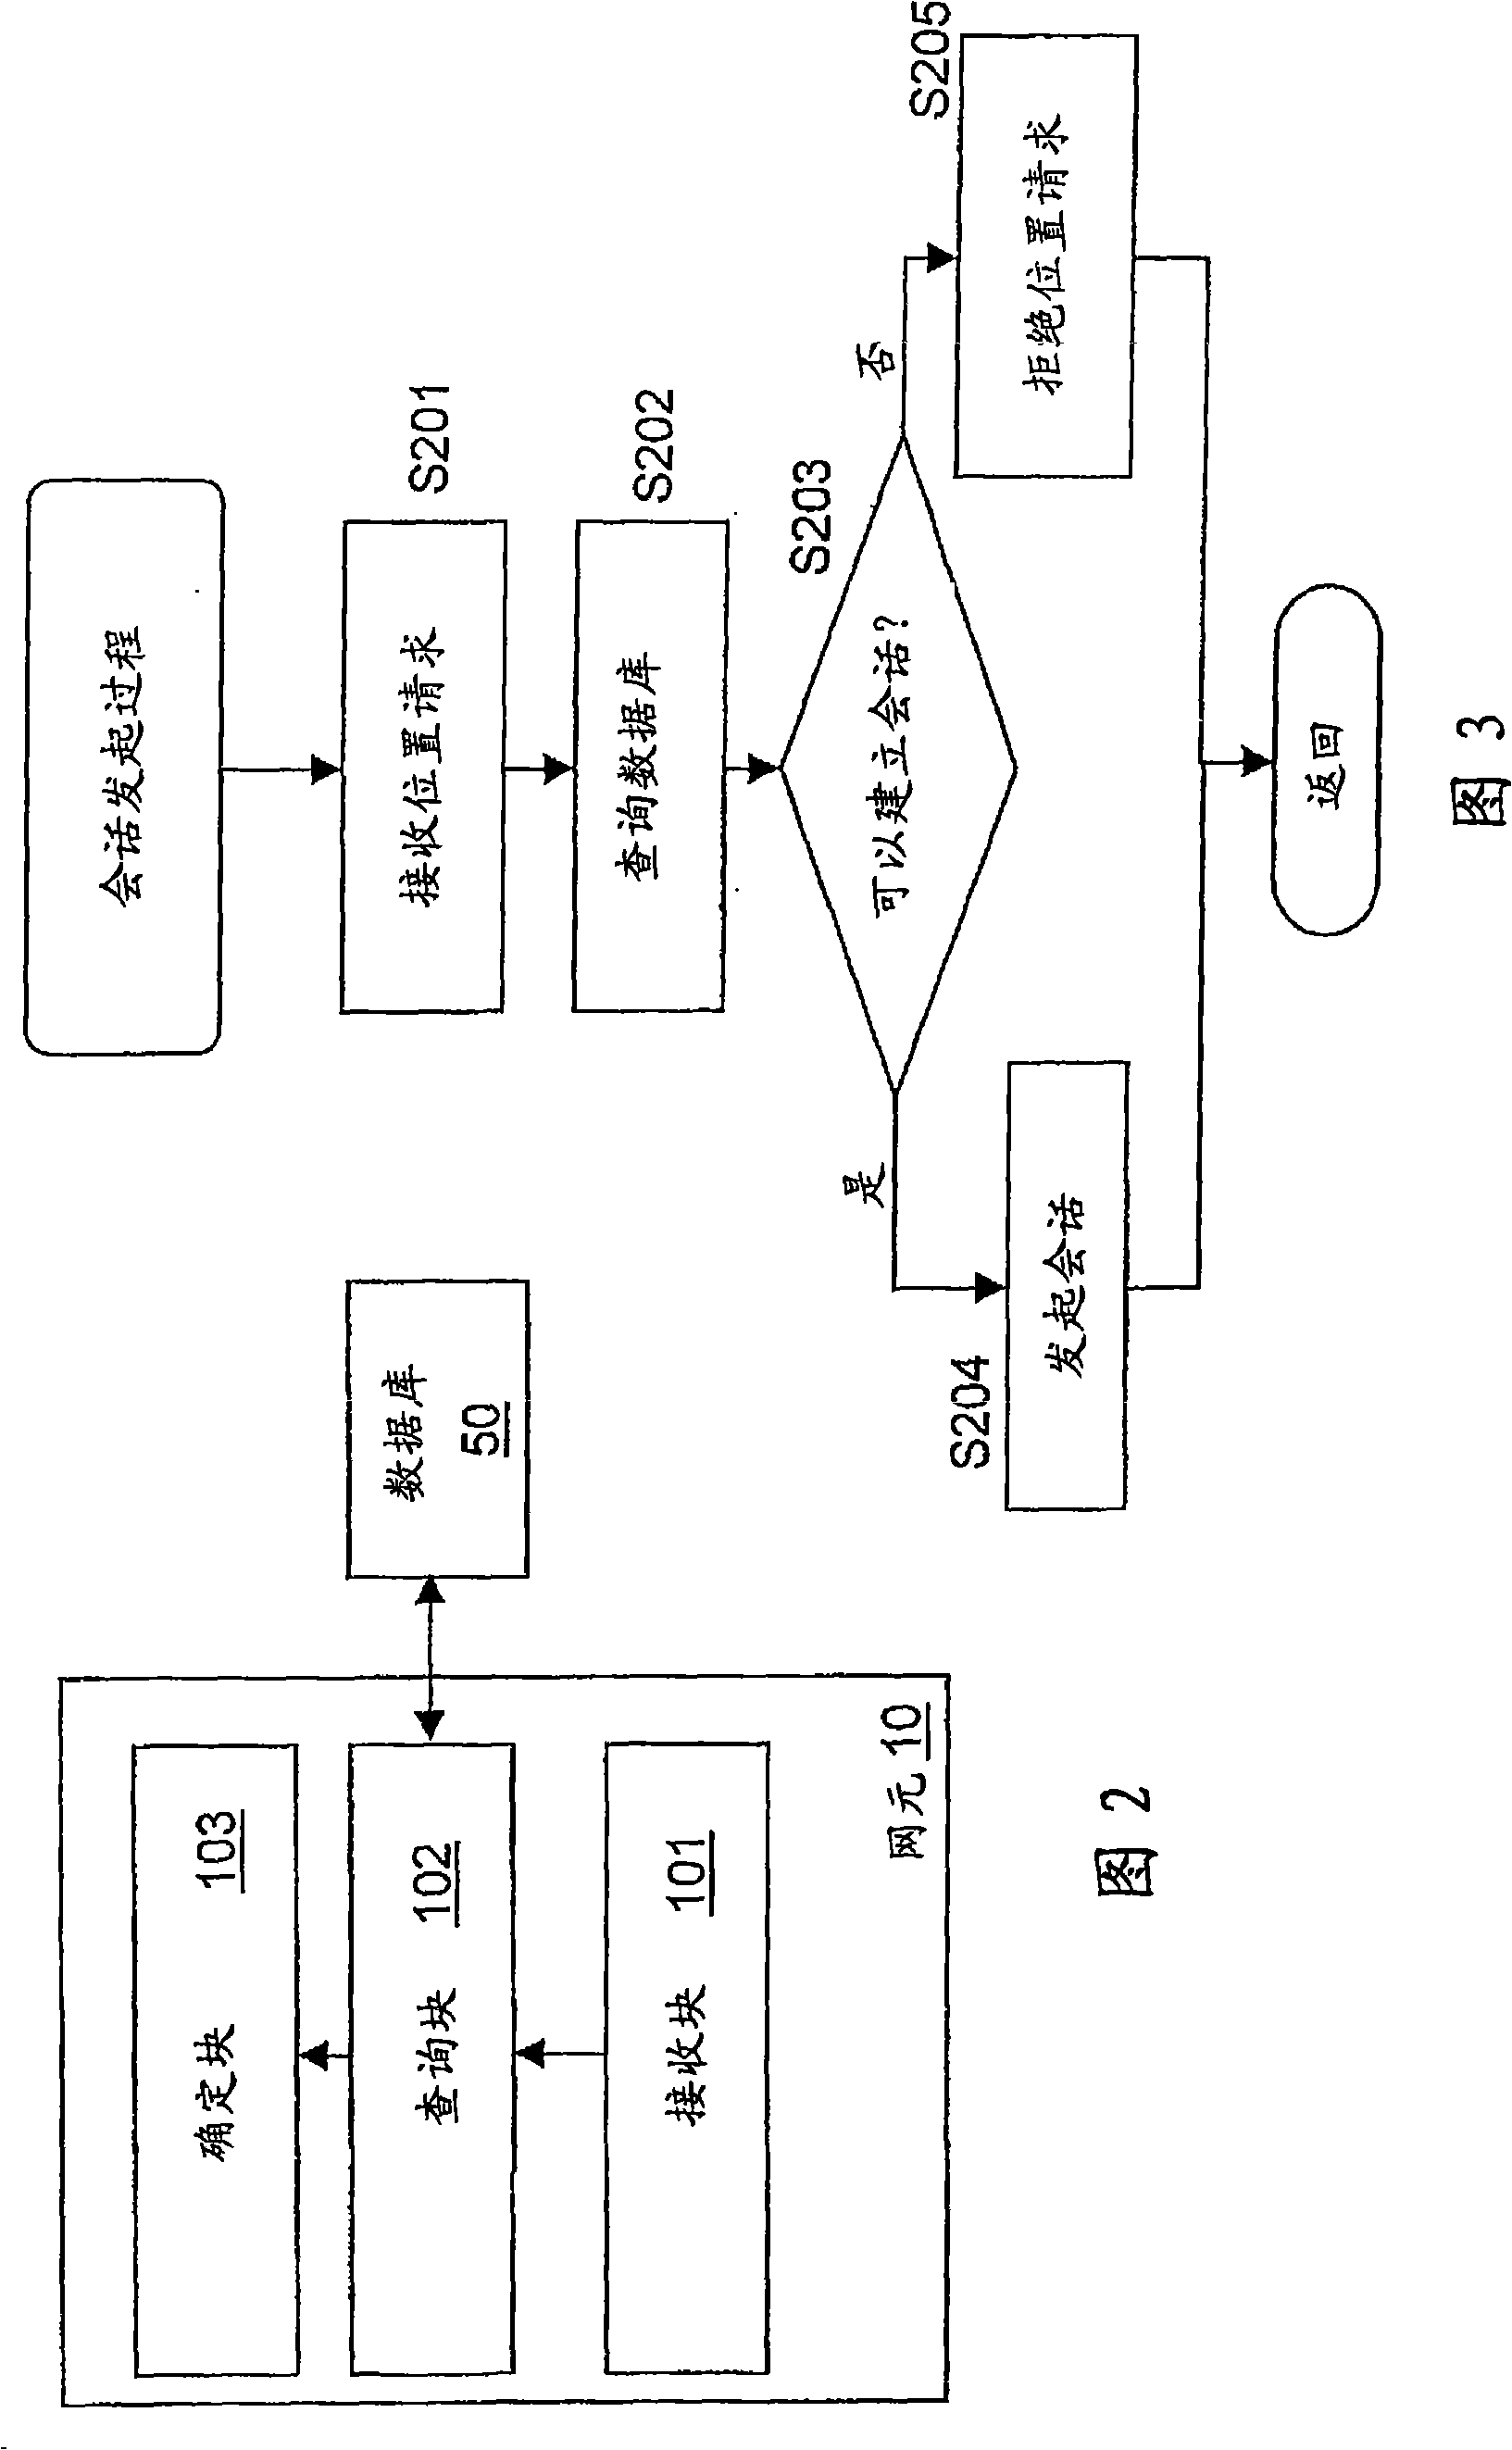 Terminal status discovery in secure user plane location positioning procedure